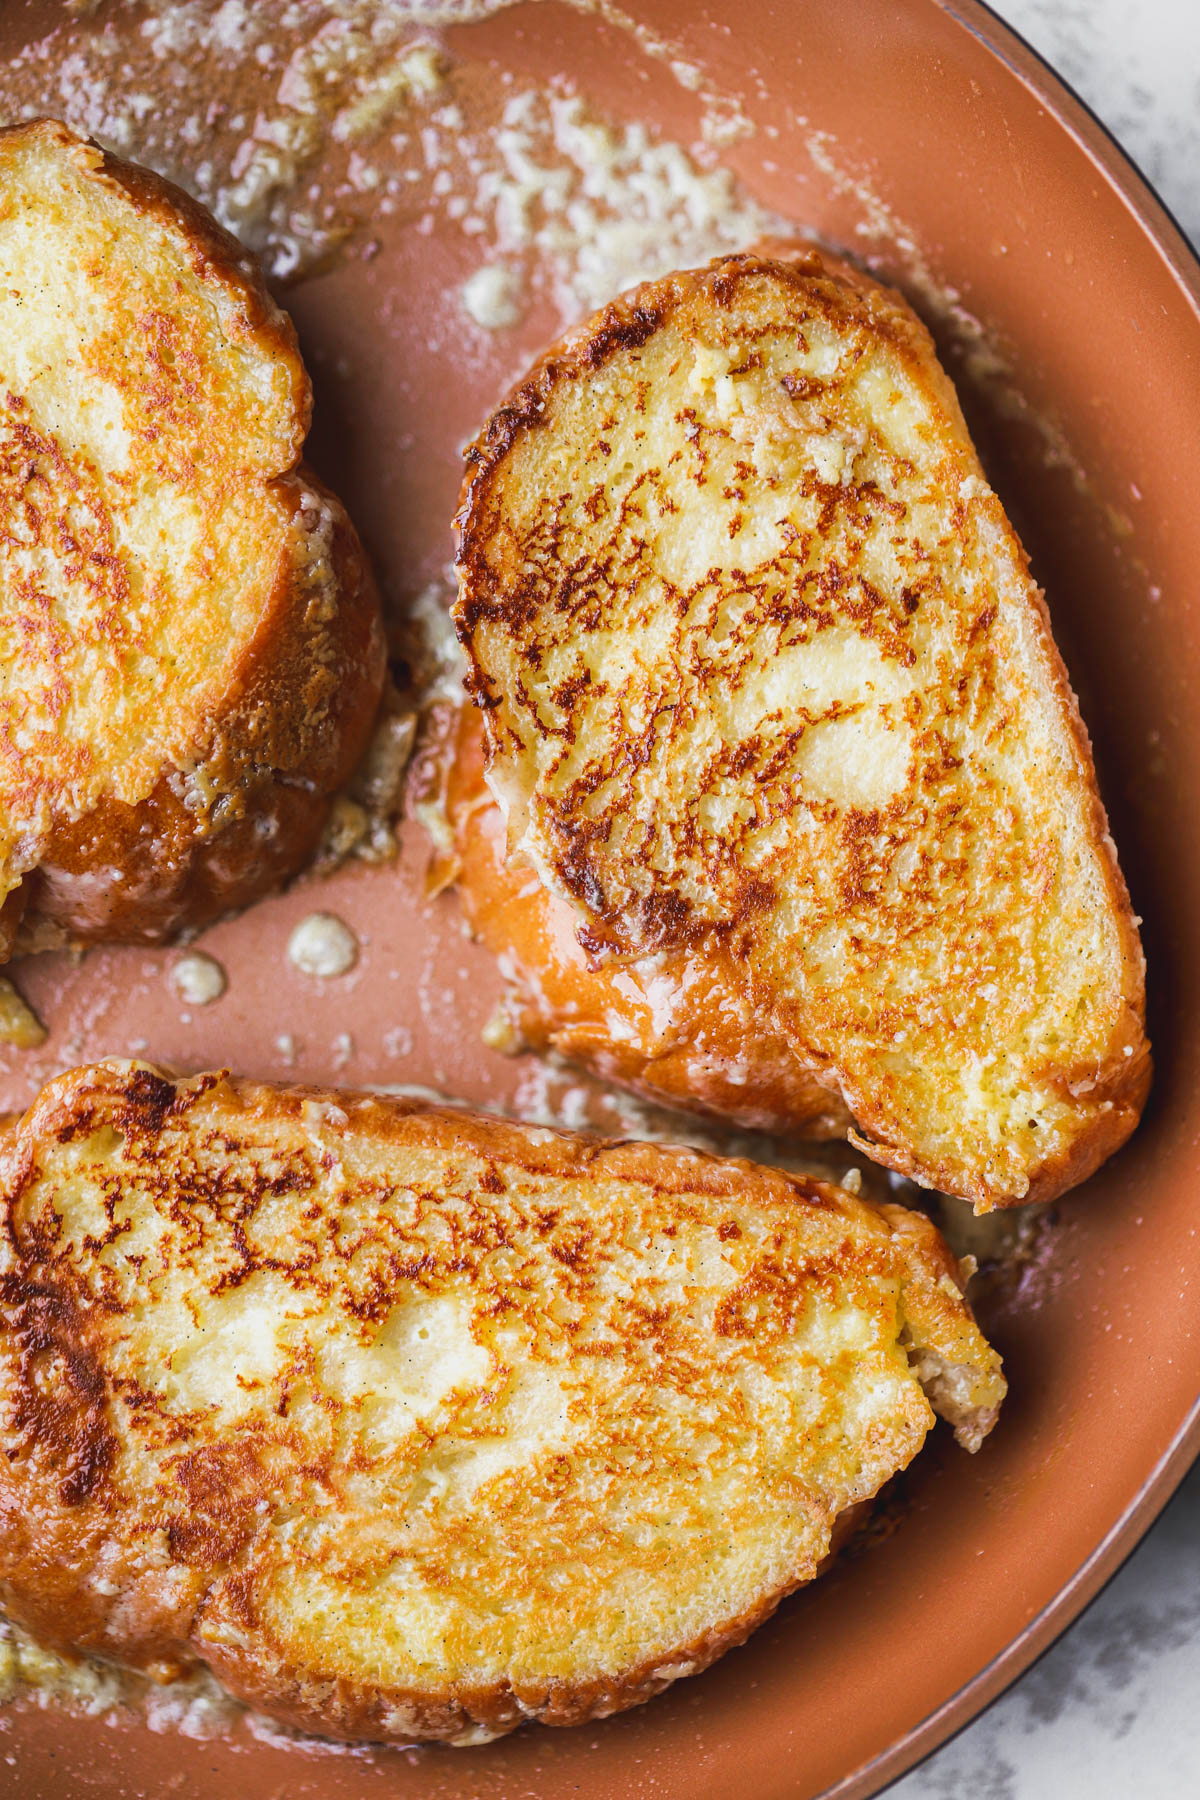 Custard French toast cooked inside a hot skillet with melted butter.